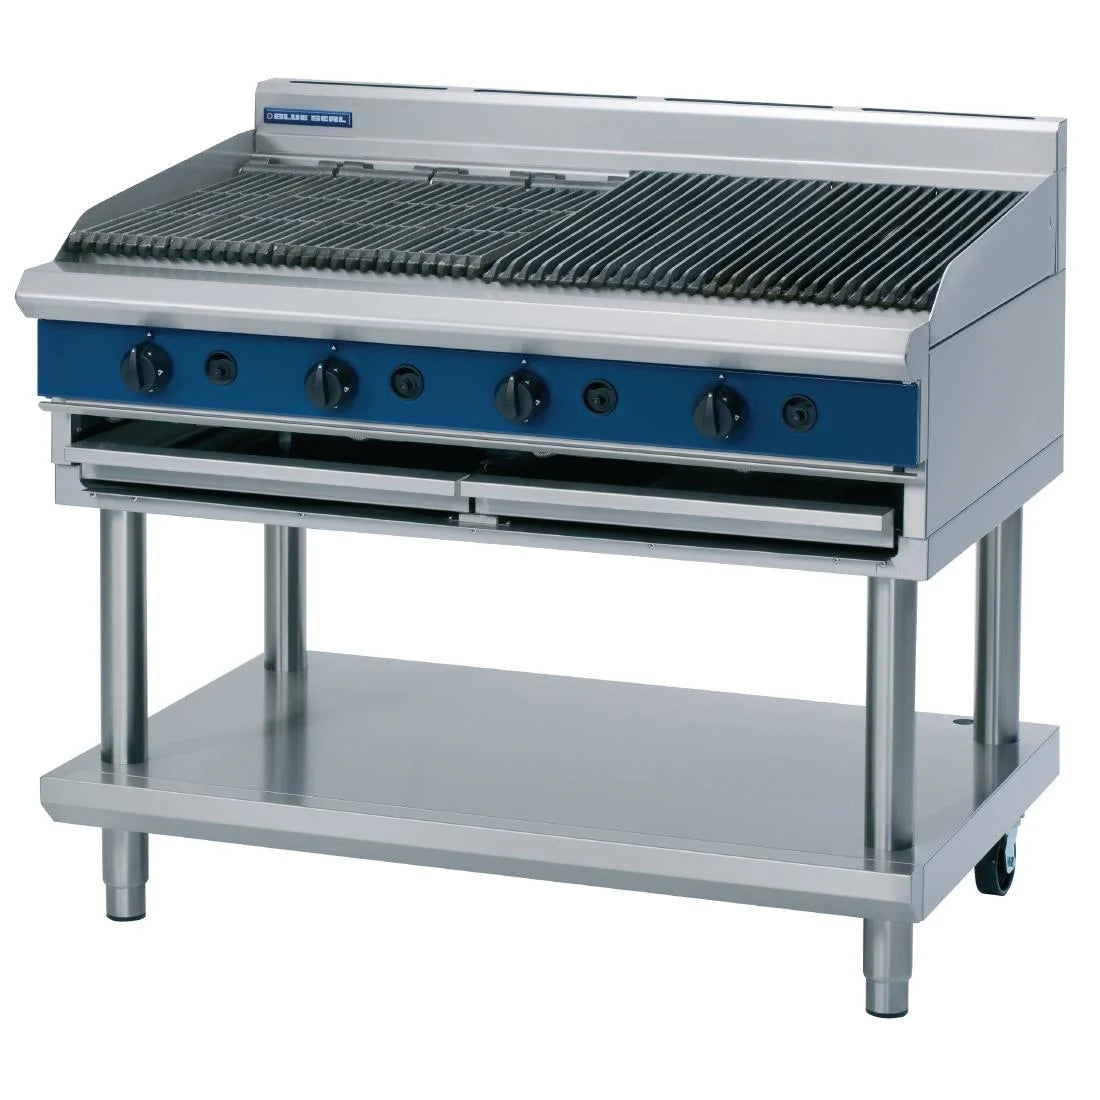 Blue Seal Evolution Chargrill with Leg Stand 1200mm.Product Ref:00706.Model:G598-LS/N. 🚚 3-5 Days Delivery